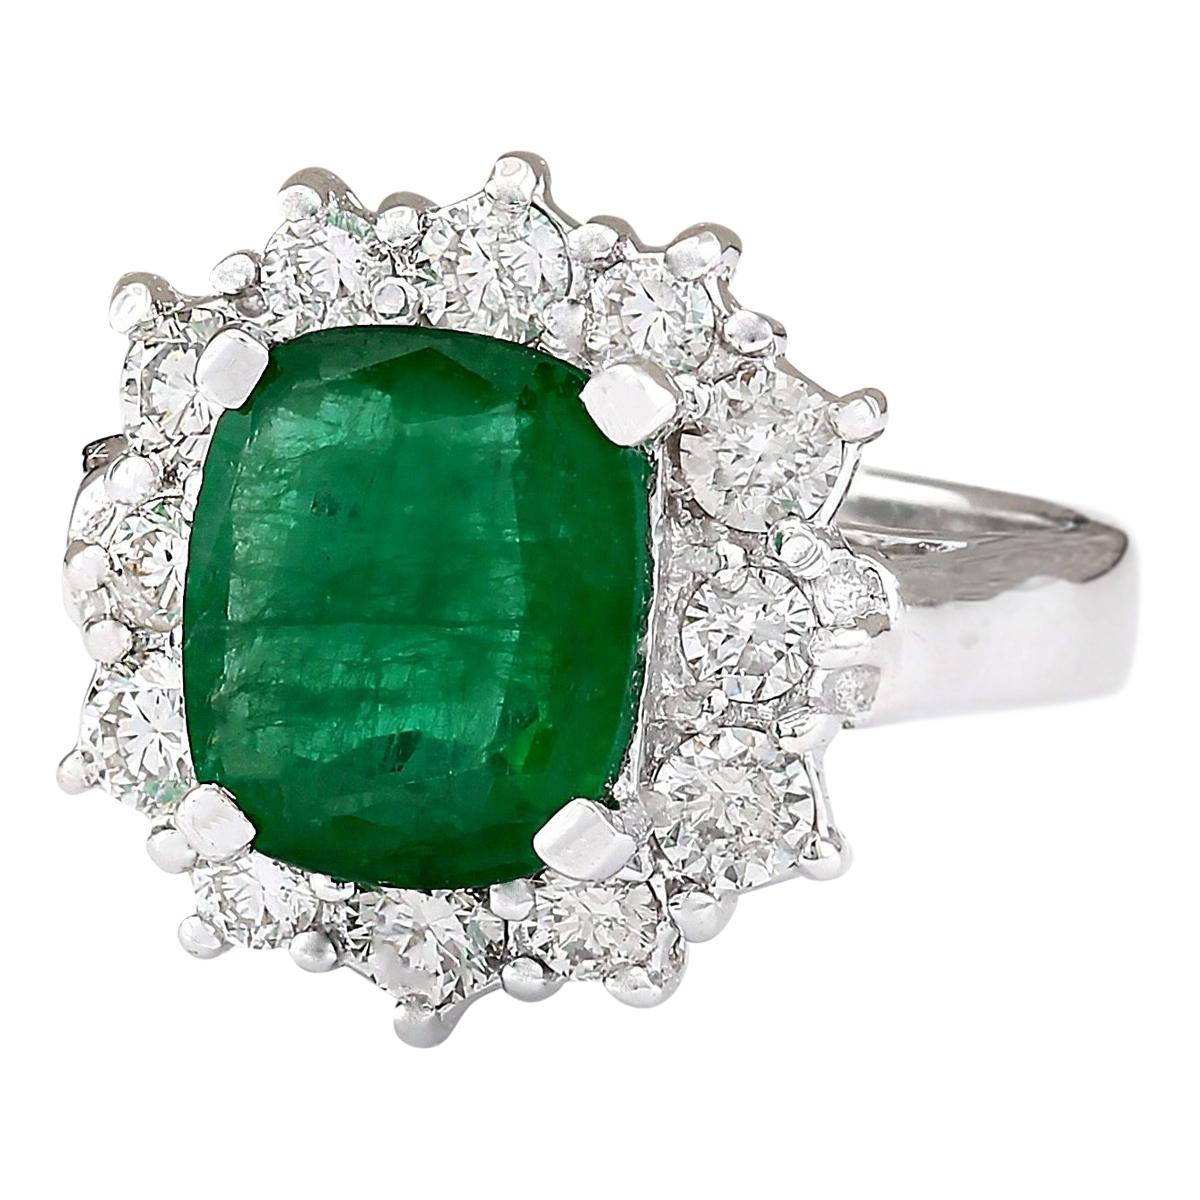 3.20 Carat Natural Emerald 14 Karat White Gold Diamond Ring
Stamped: 14K White Gold
Total Ring Weight: 6.7 Grams
Total Natural Emerald Weight is 2.10 Carat (Measures: 10.00x8.00 mm)
Treatment: Oiling 
Color: Green
Diamond Weight: Total Natural